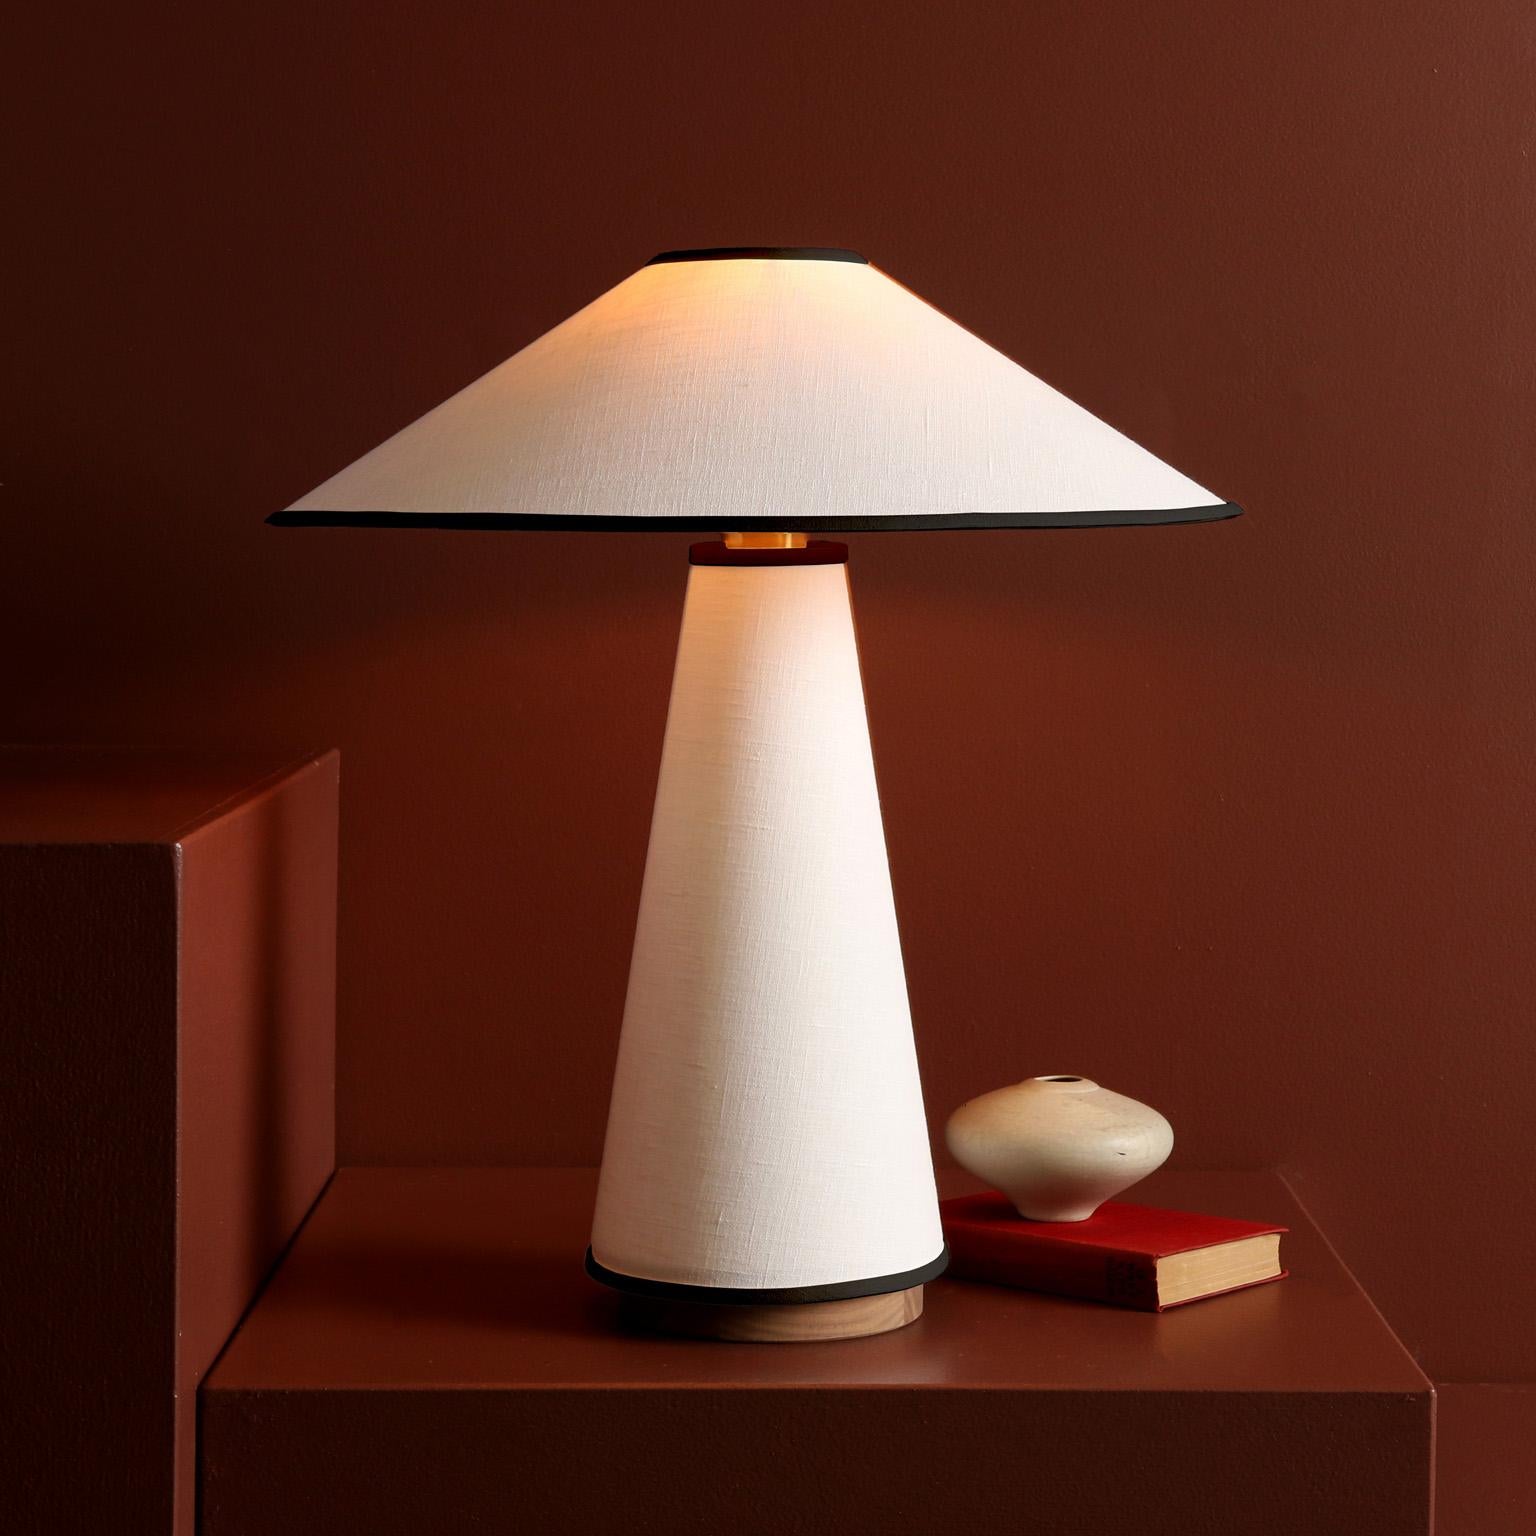 A contemporary table lamp with a linen shade and body, hardwood base, and brass details. The structural shape, distinct clean lines, and neutral tones are derived from classic mid-century modern design. Linen fabric gives a lustrous, glowing quality